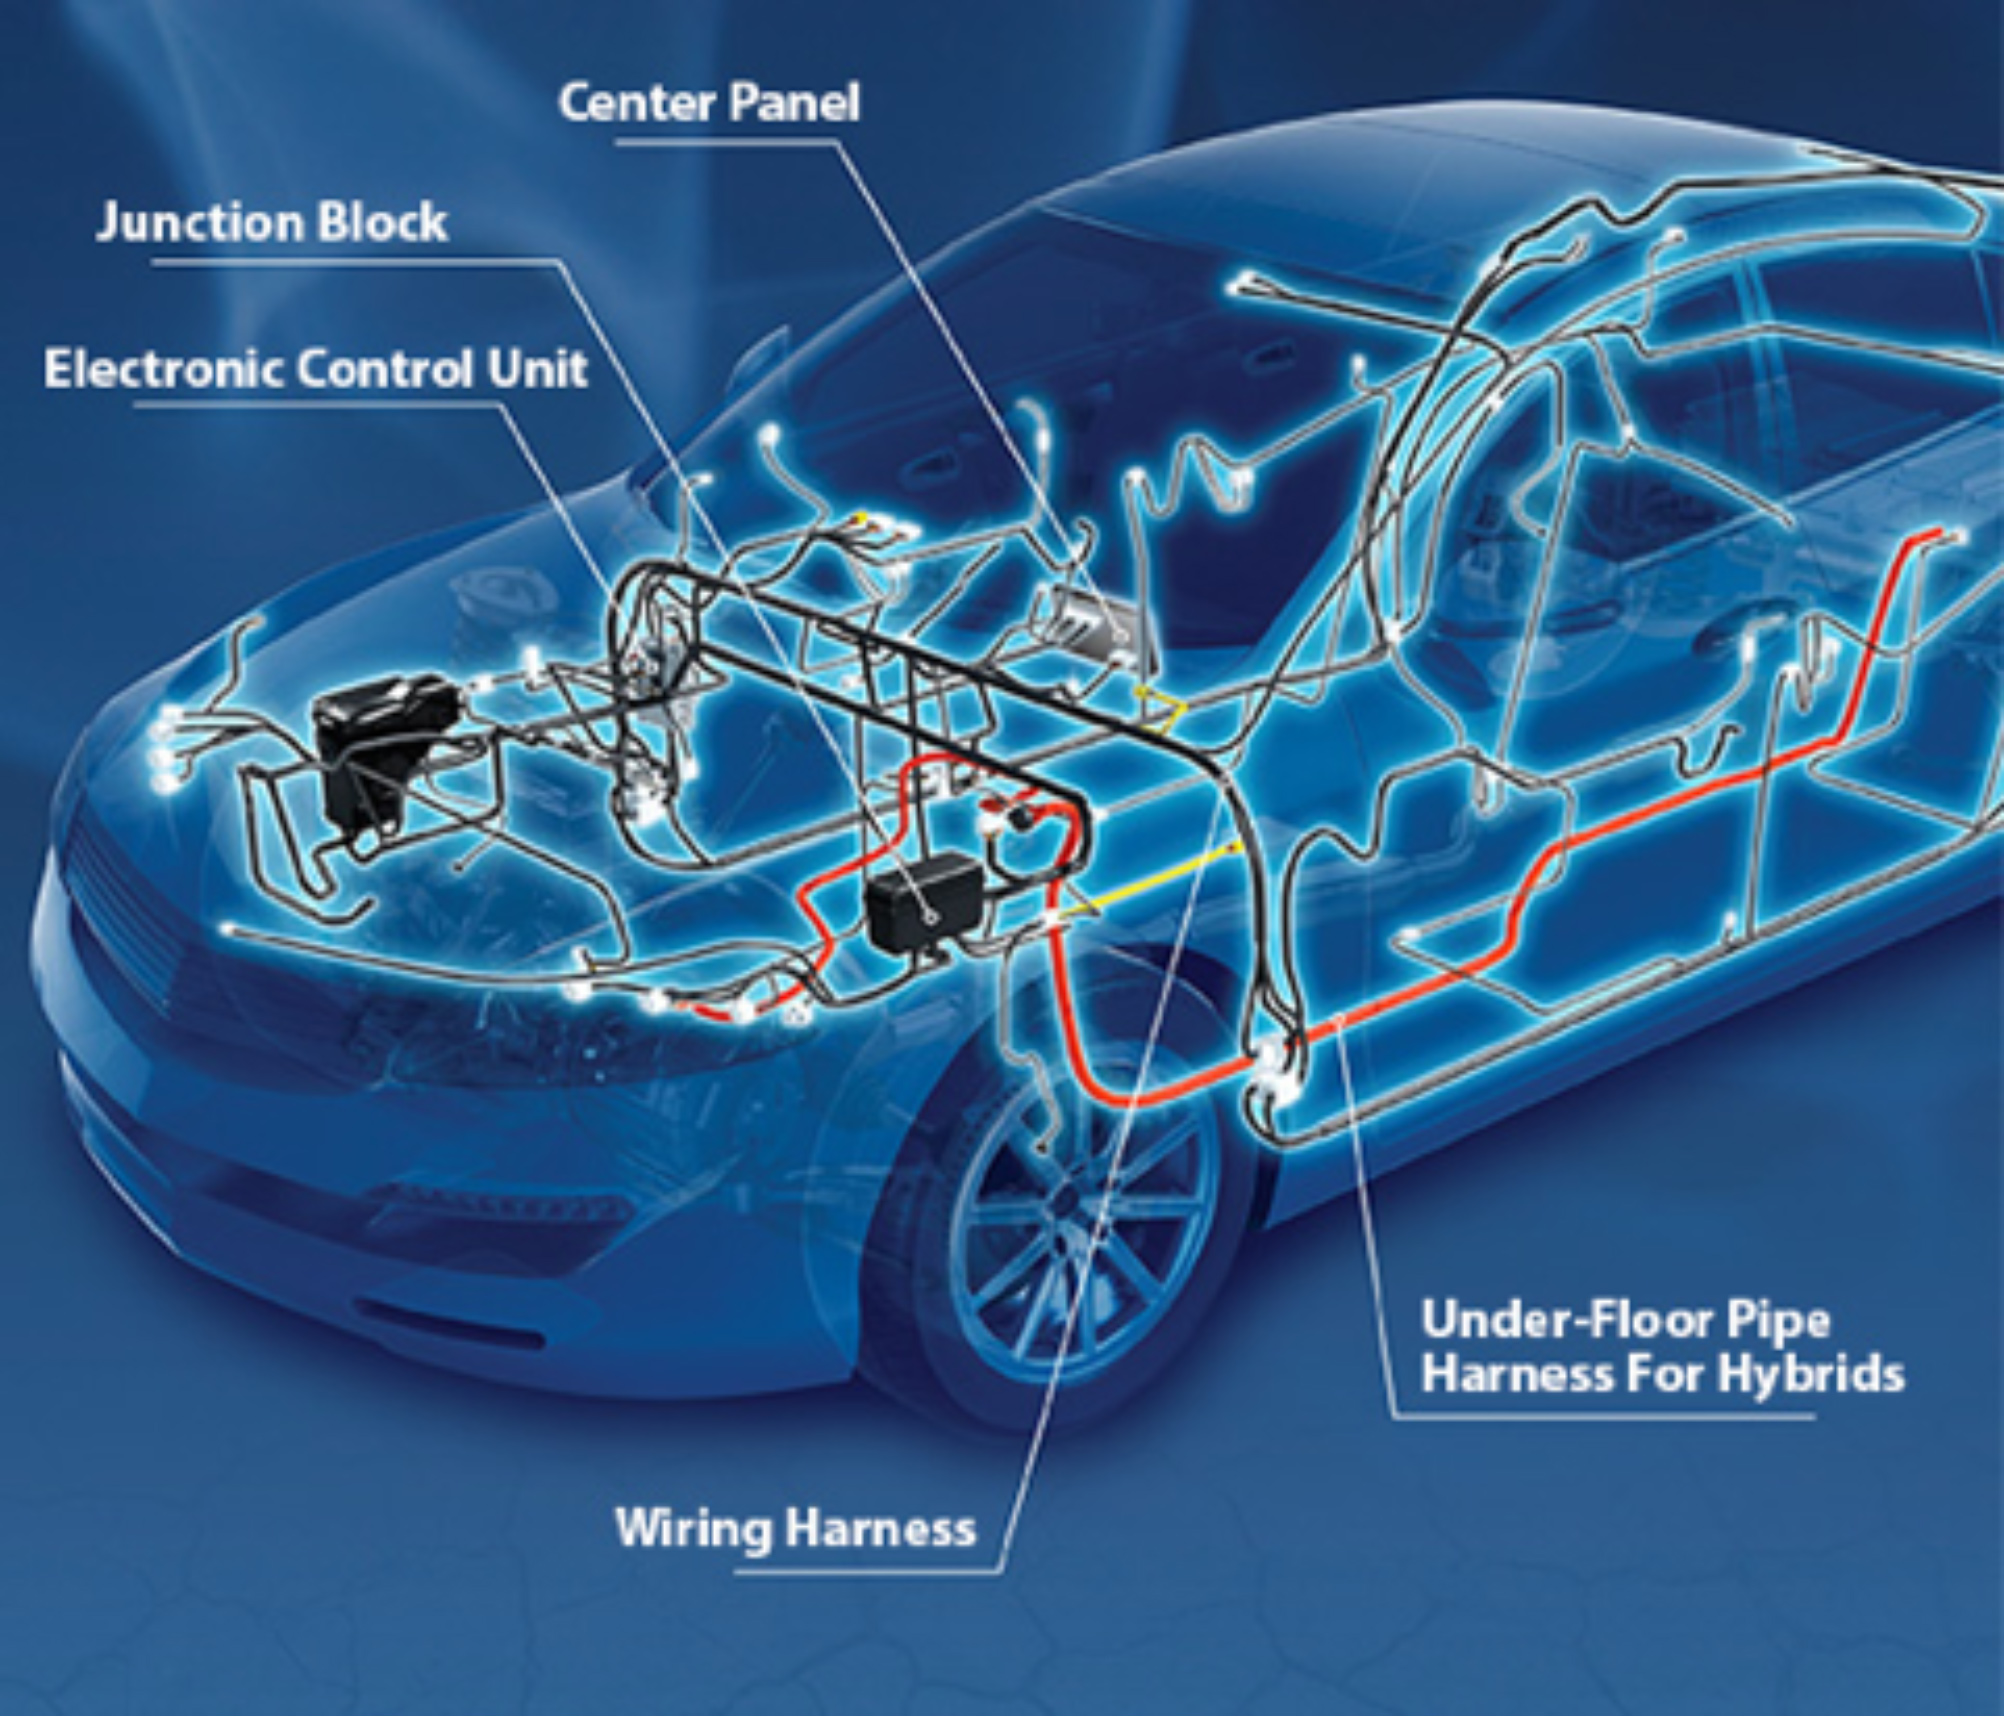 Wiring harnesses and components - SEWS CABIND automotive wiring harness materials 